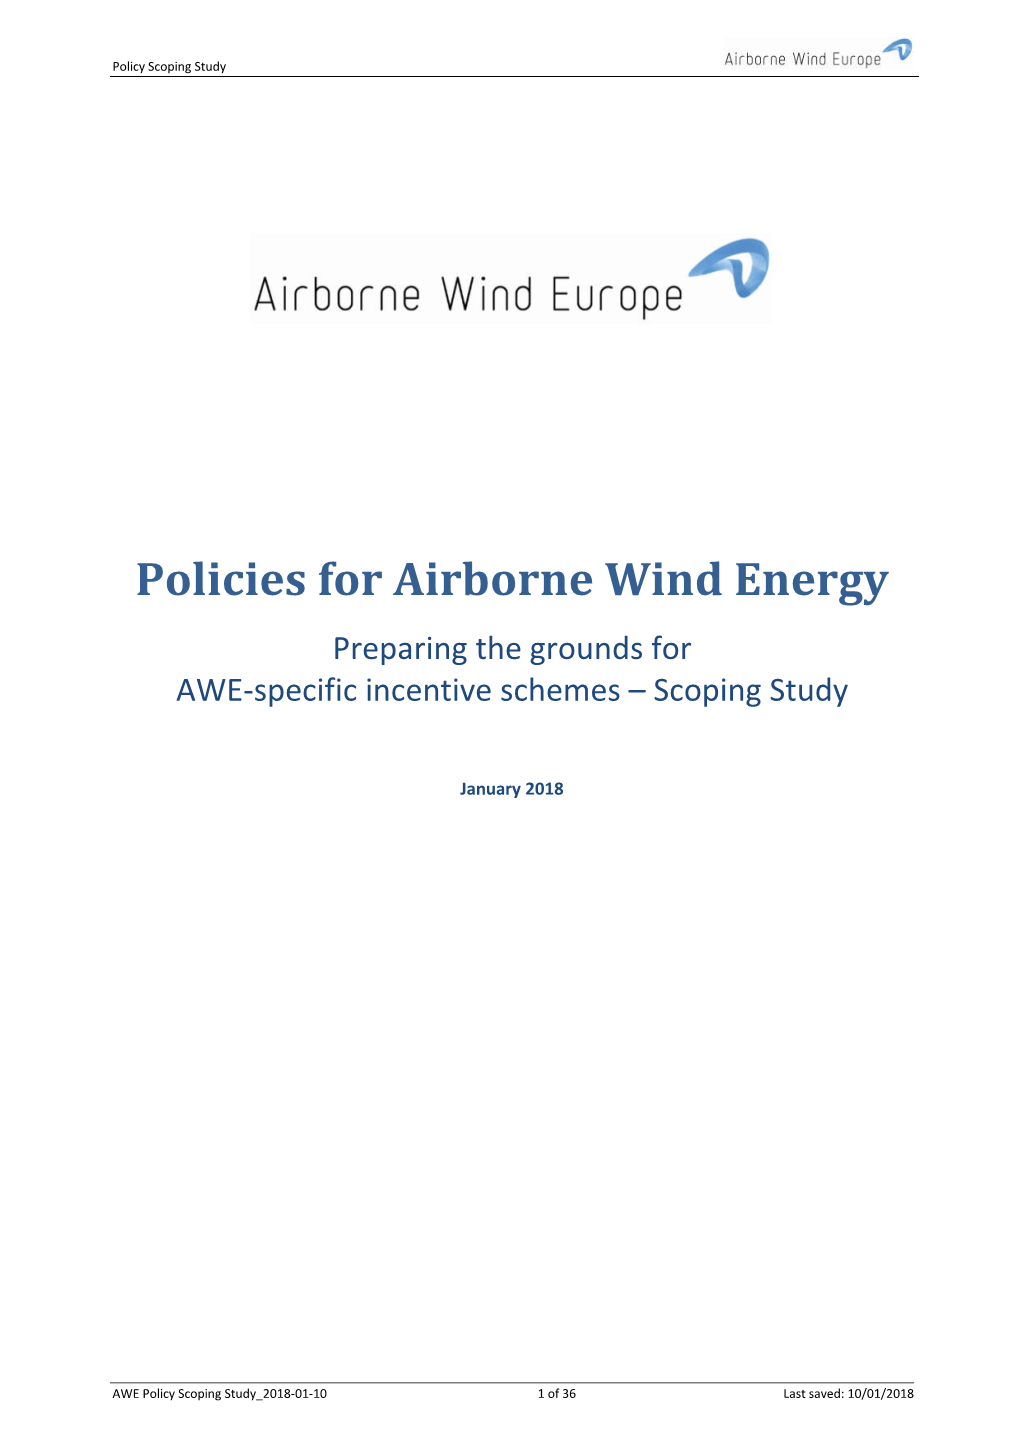 Policies for Airborne Wind Energy Preparing the Grounds for AWE-Specific Incentive Schemes – Scoping Study